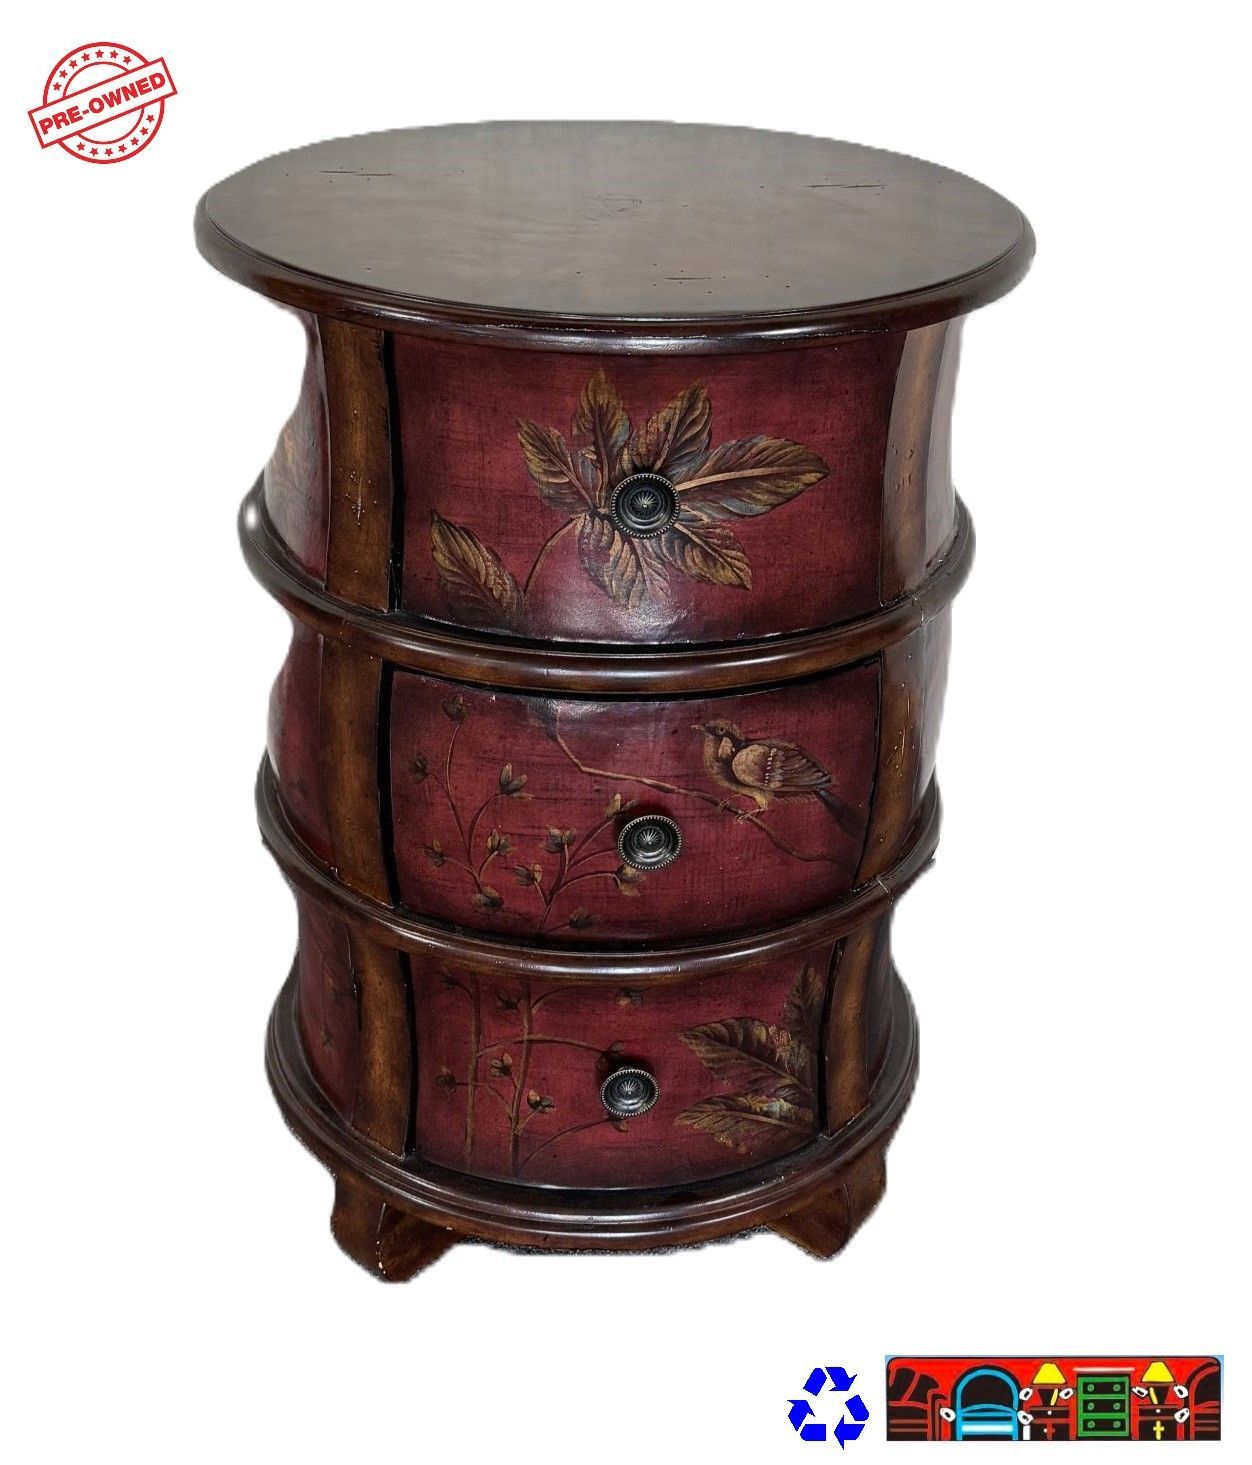 A round accent chest, featuring brown and red drawers with hand-painted leaves on the front, is available at Bratz-CFW in Fort Myers, FL.